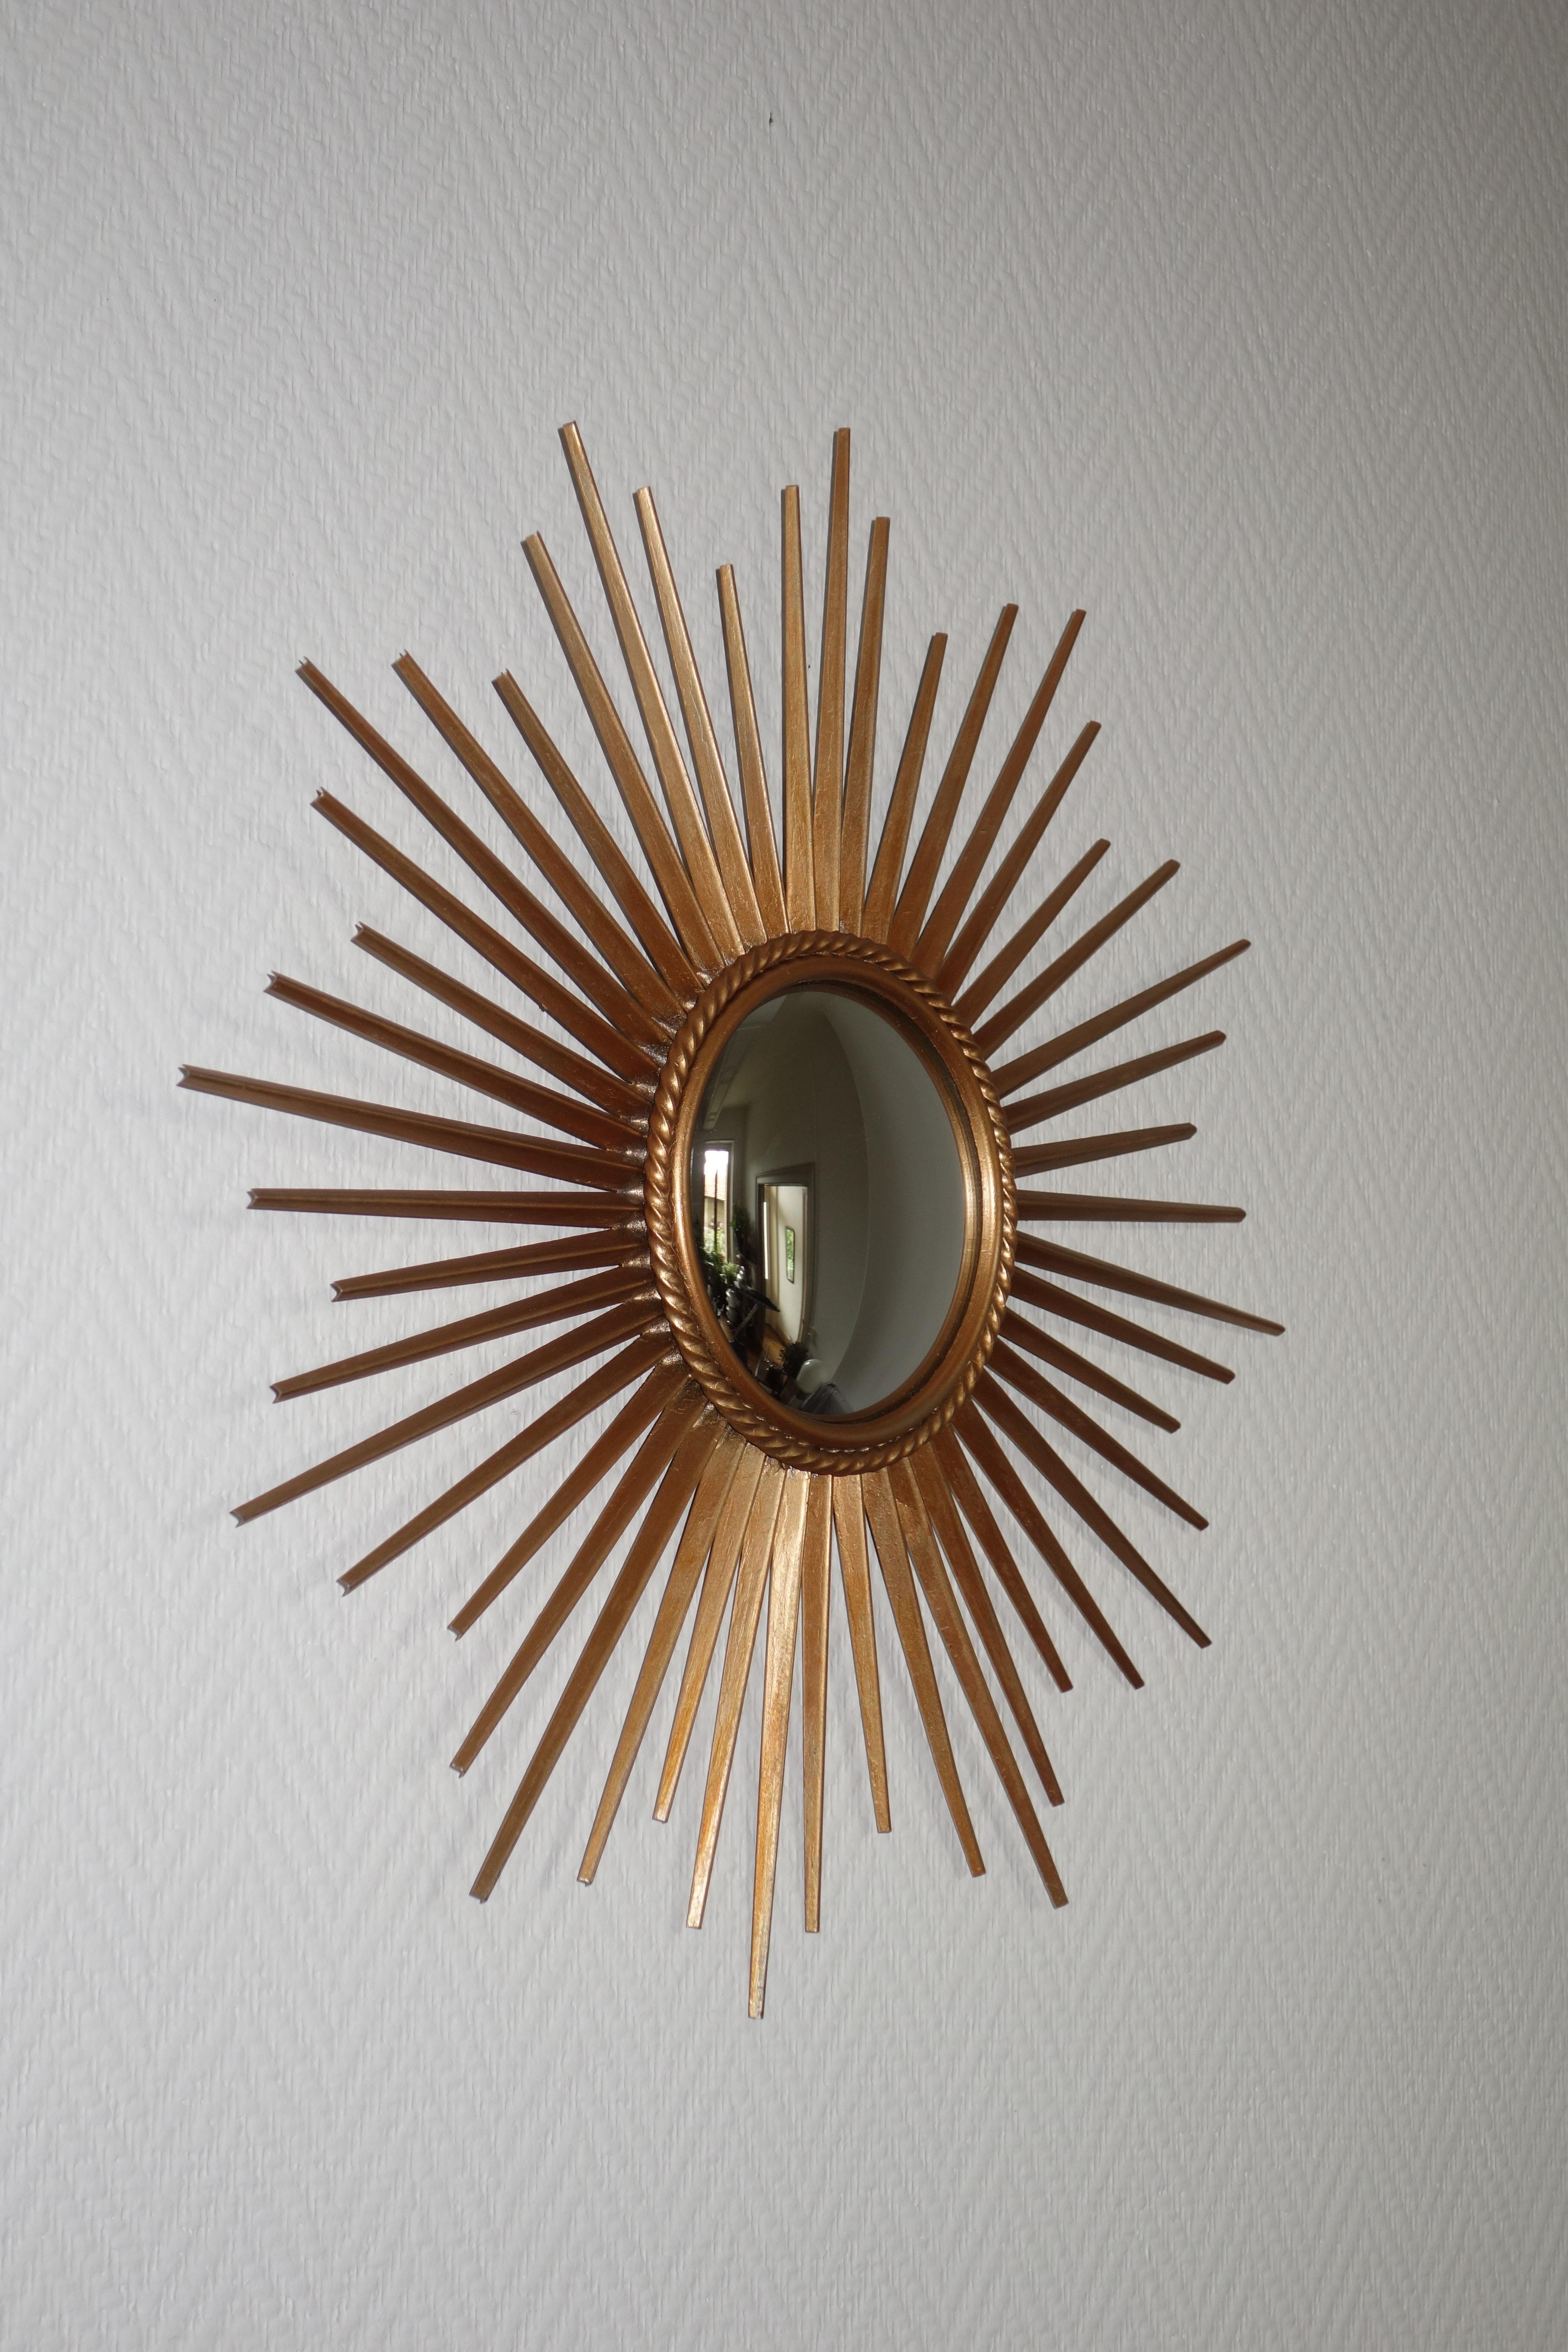 Mid-Century Modern French Sun Convex Miroir Gold by Chaty Vallauris 1950s